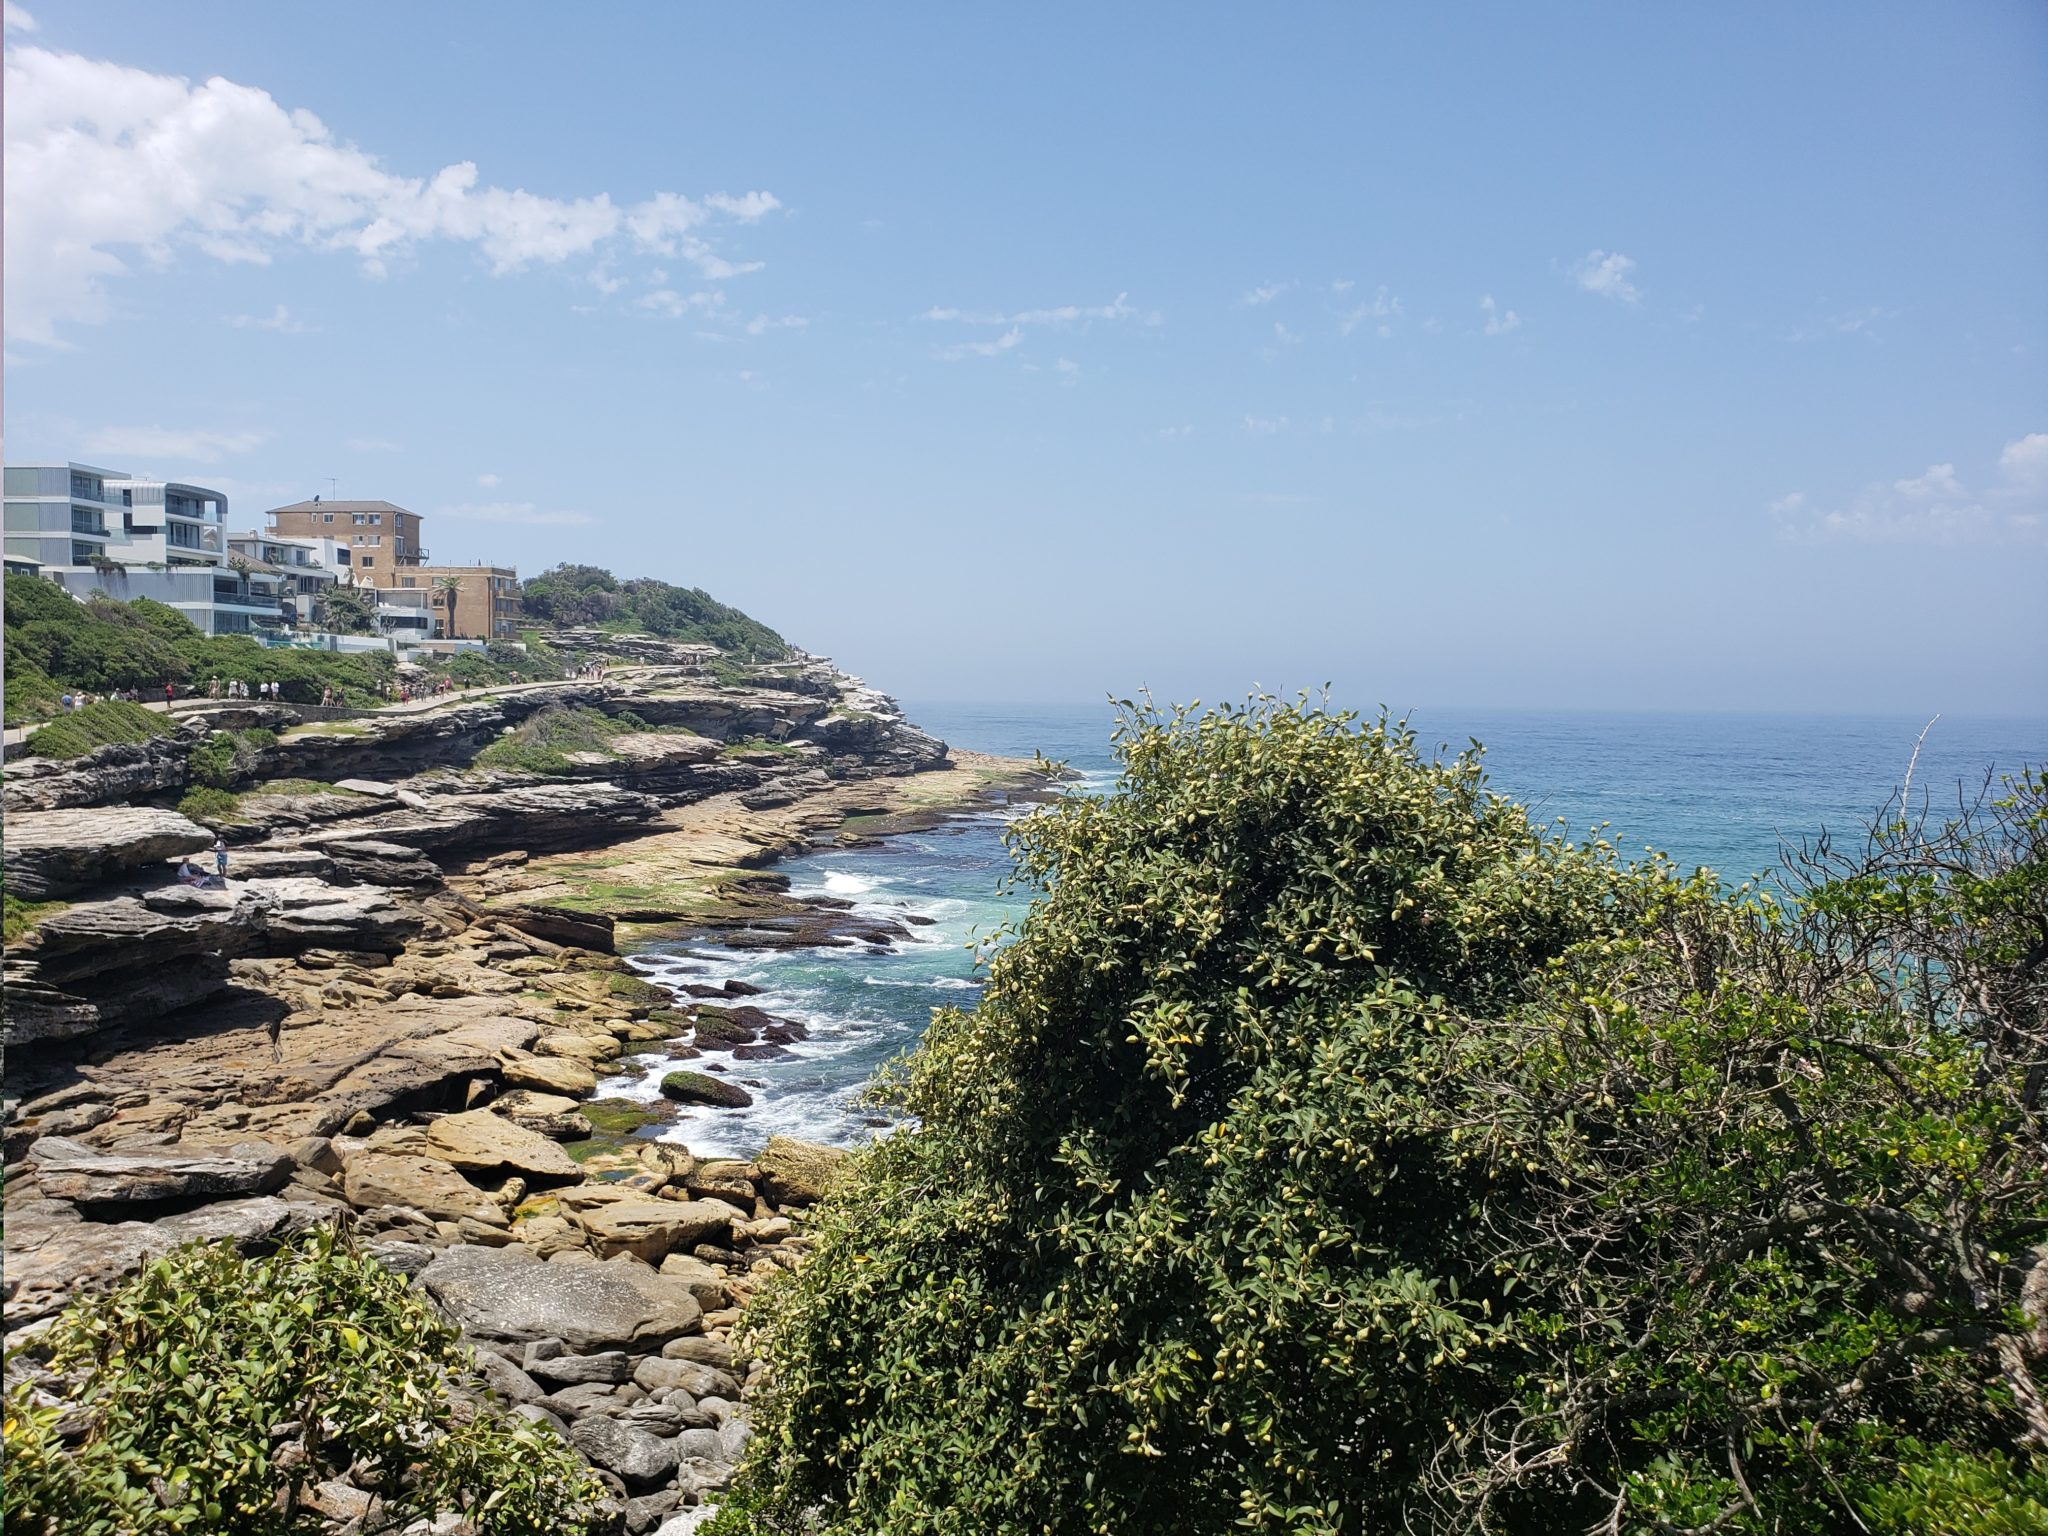 a rocky coastline with buildings and trees